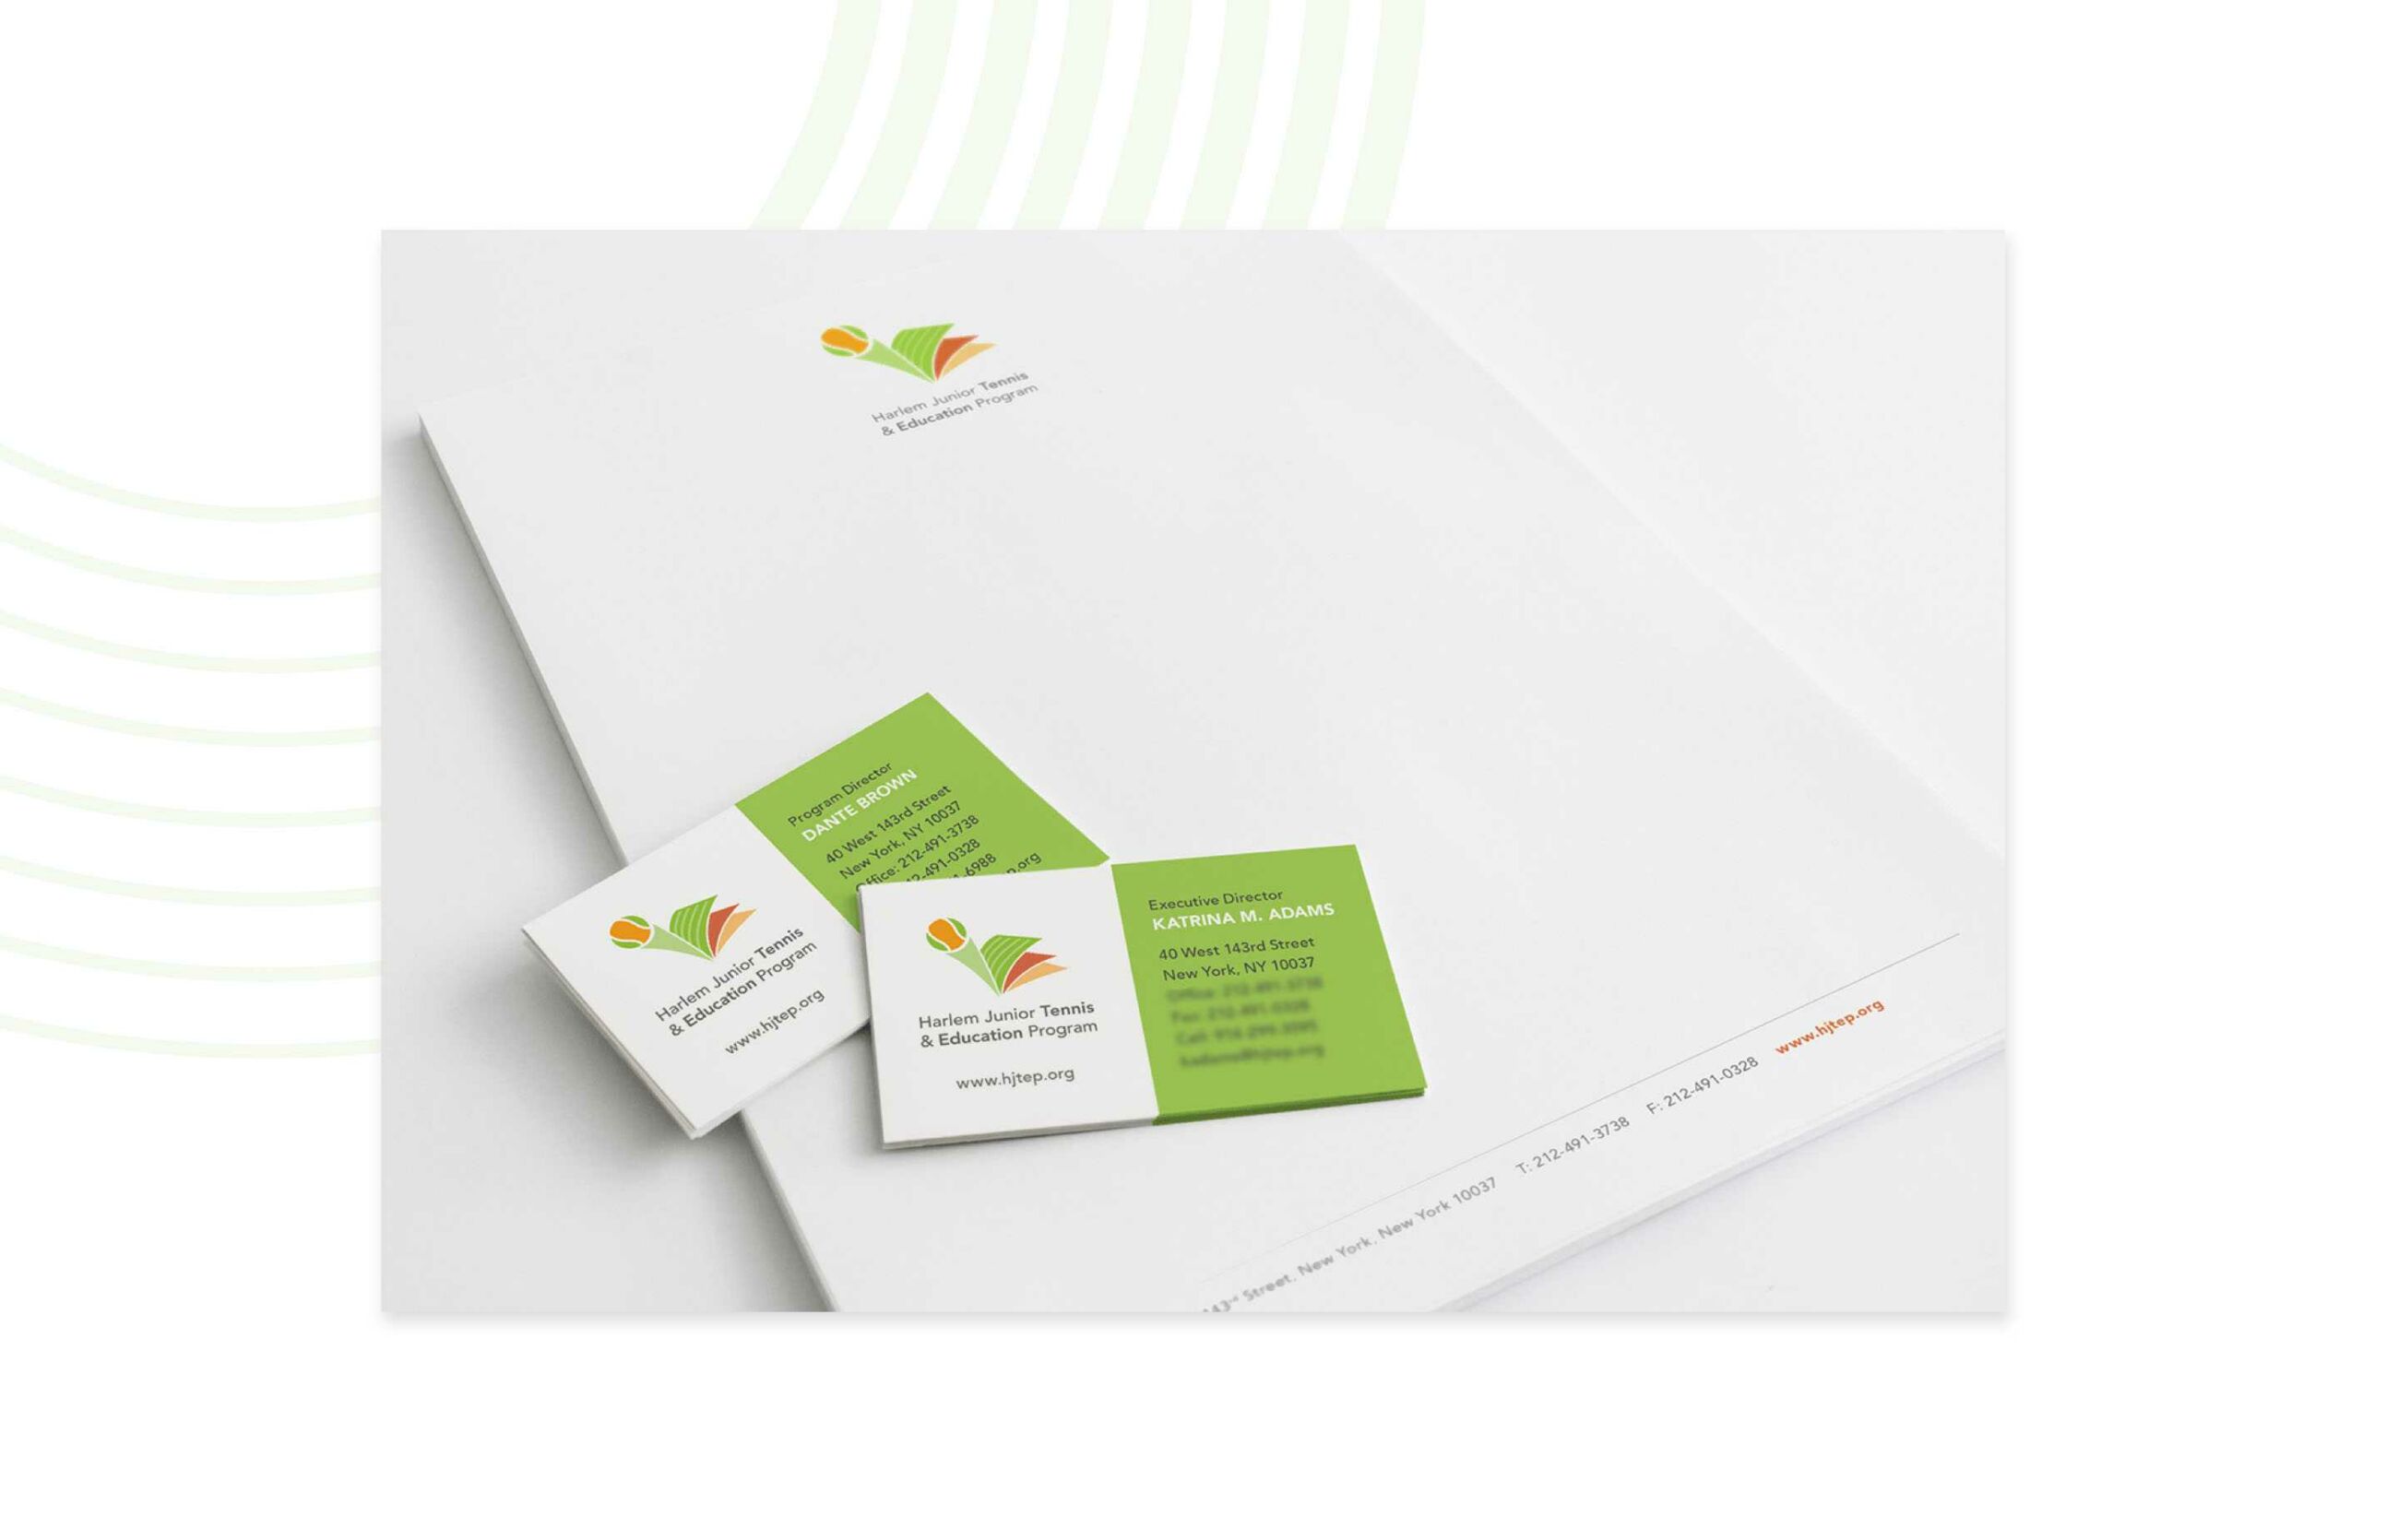 HJTEP stationery with letterhead and business cards